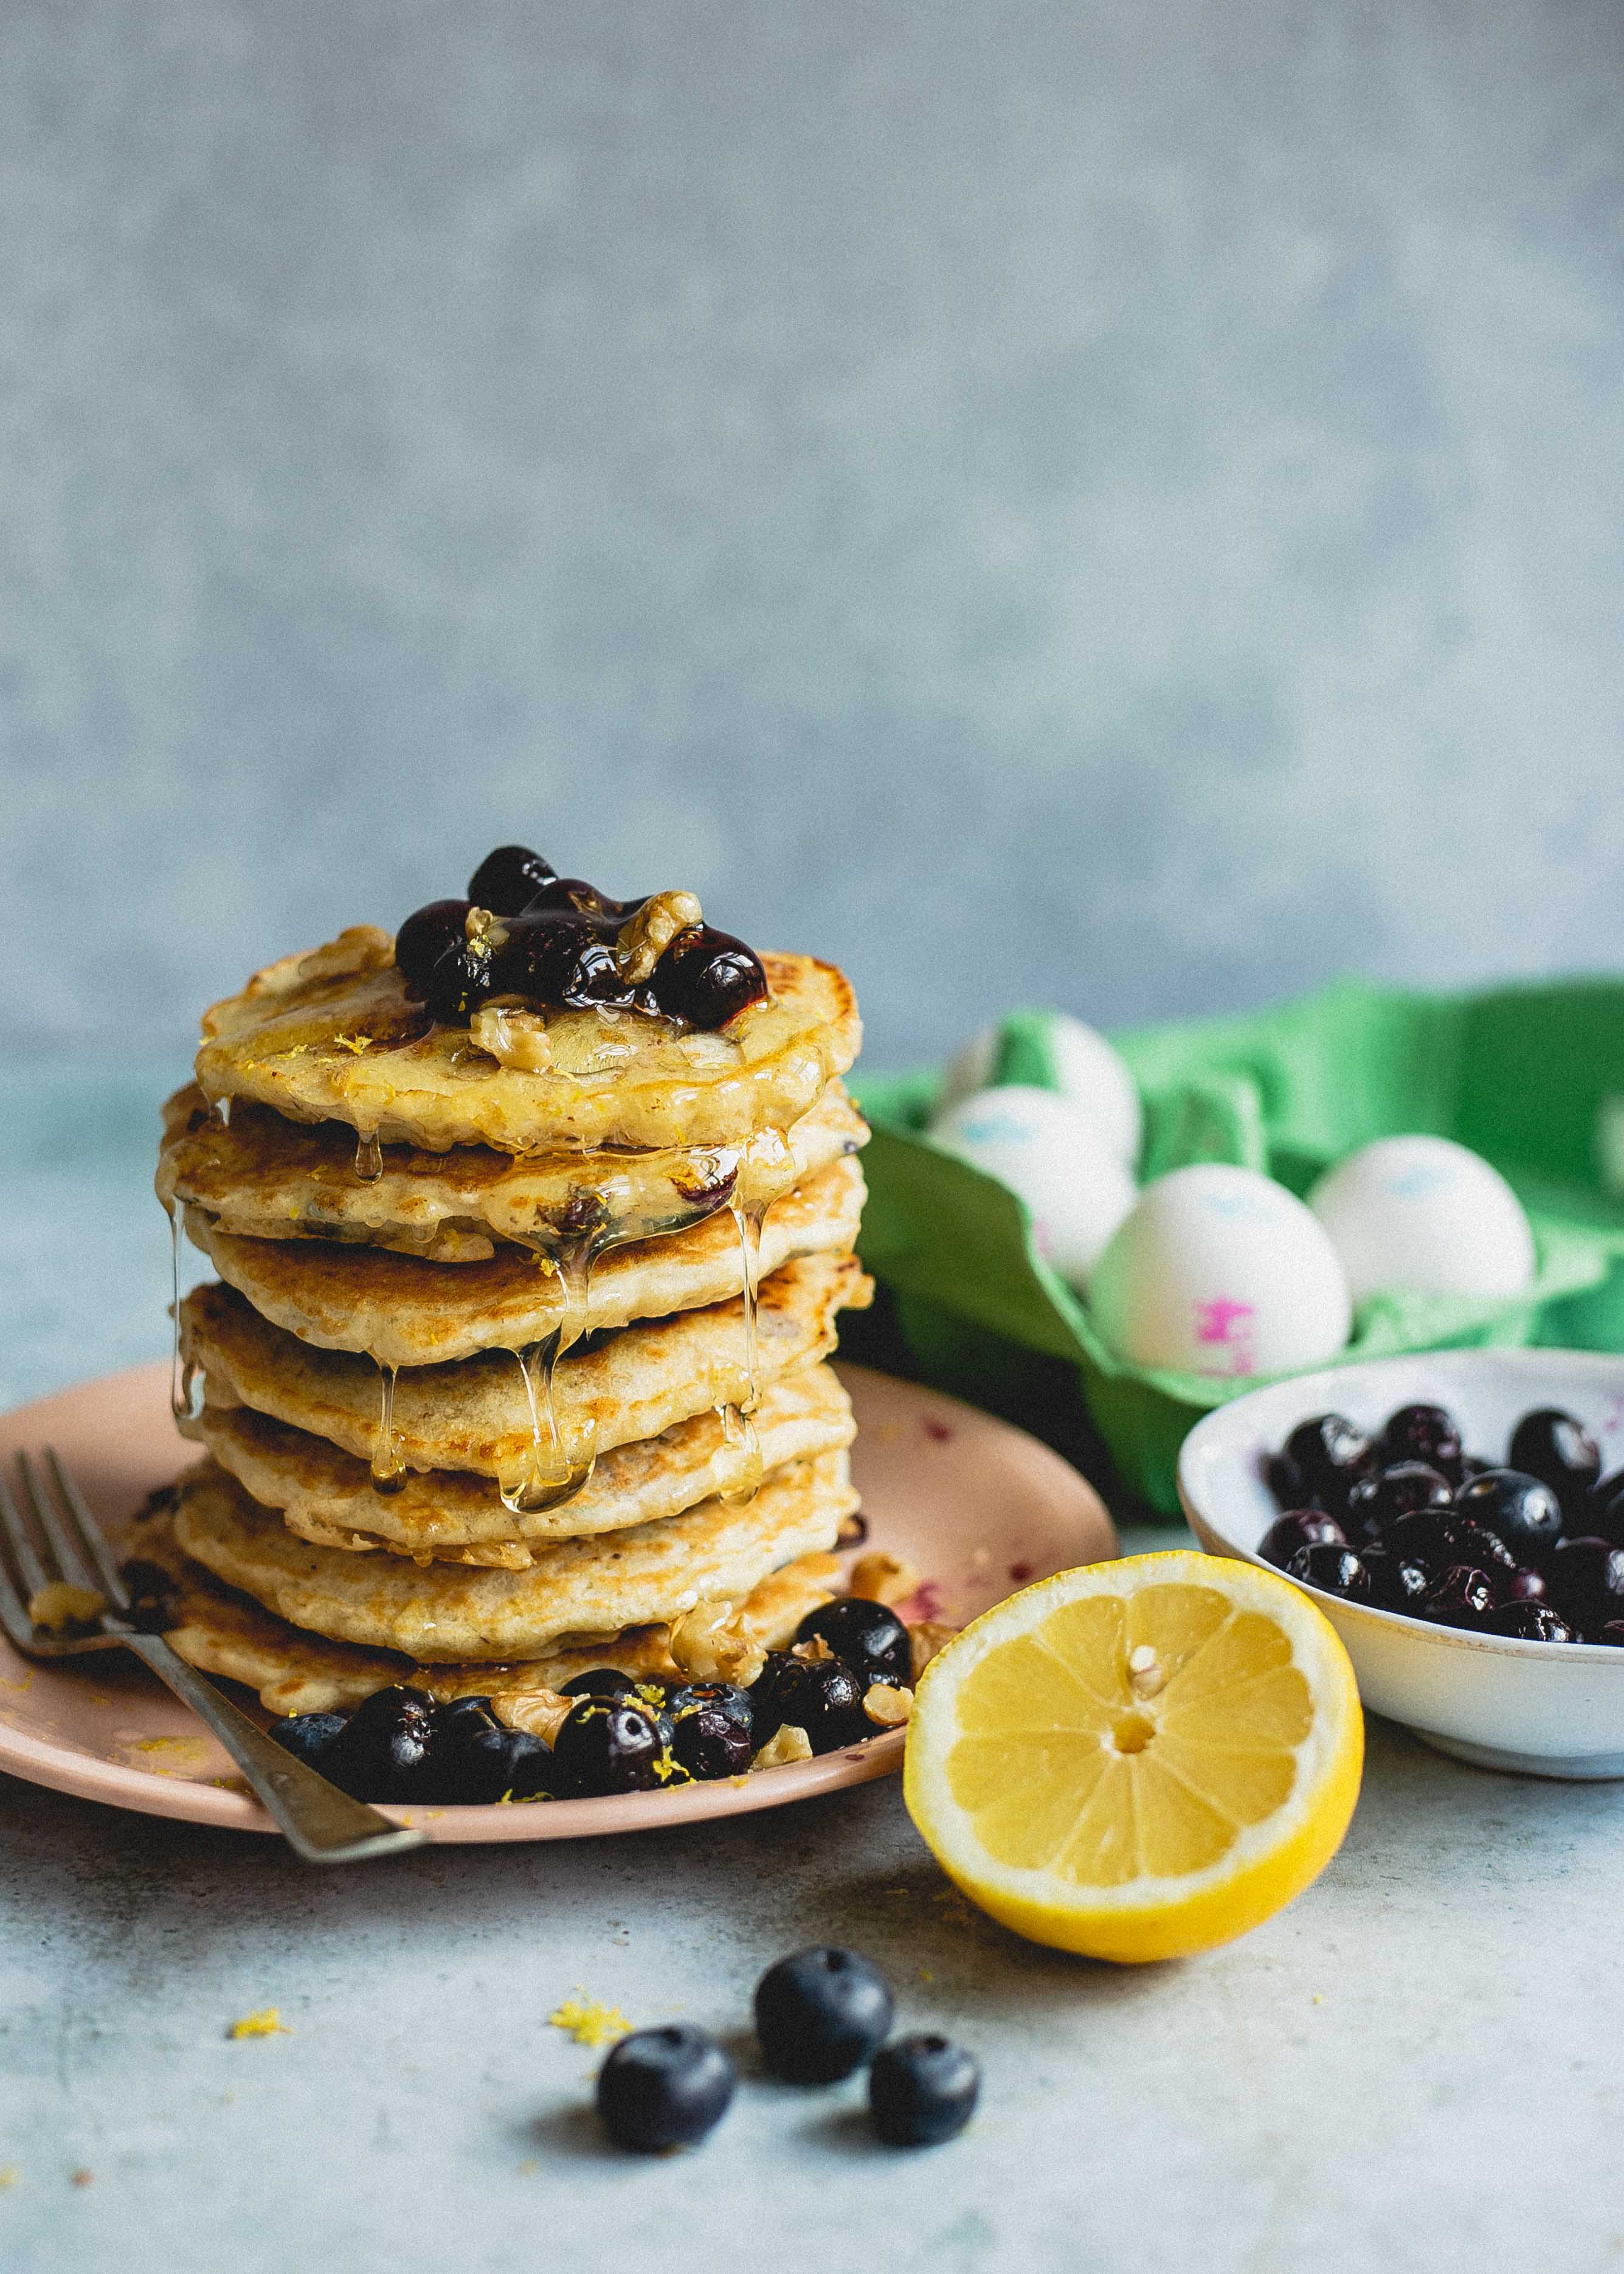 FODMAP friendly blueberry pancakes dripping with maple syrup